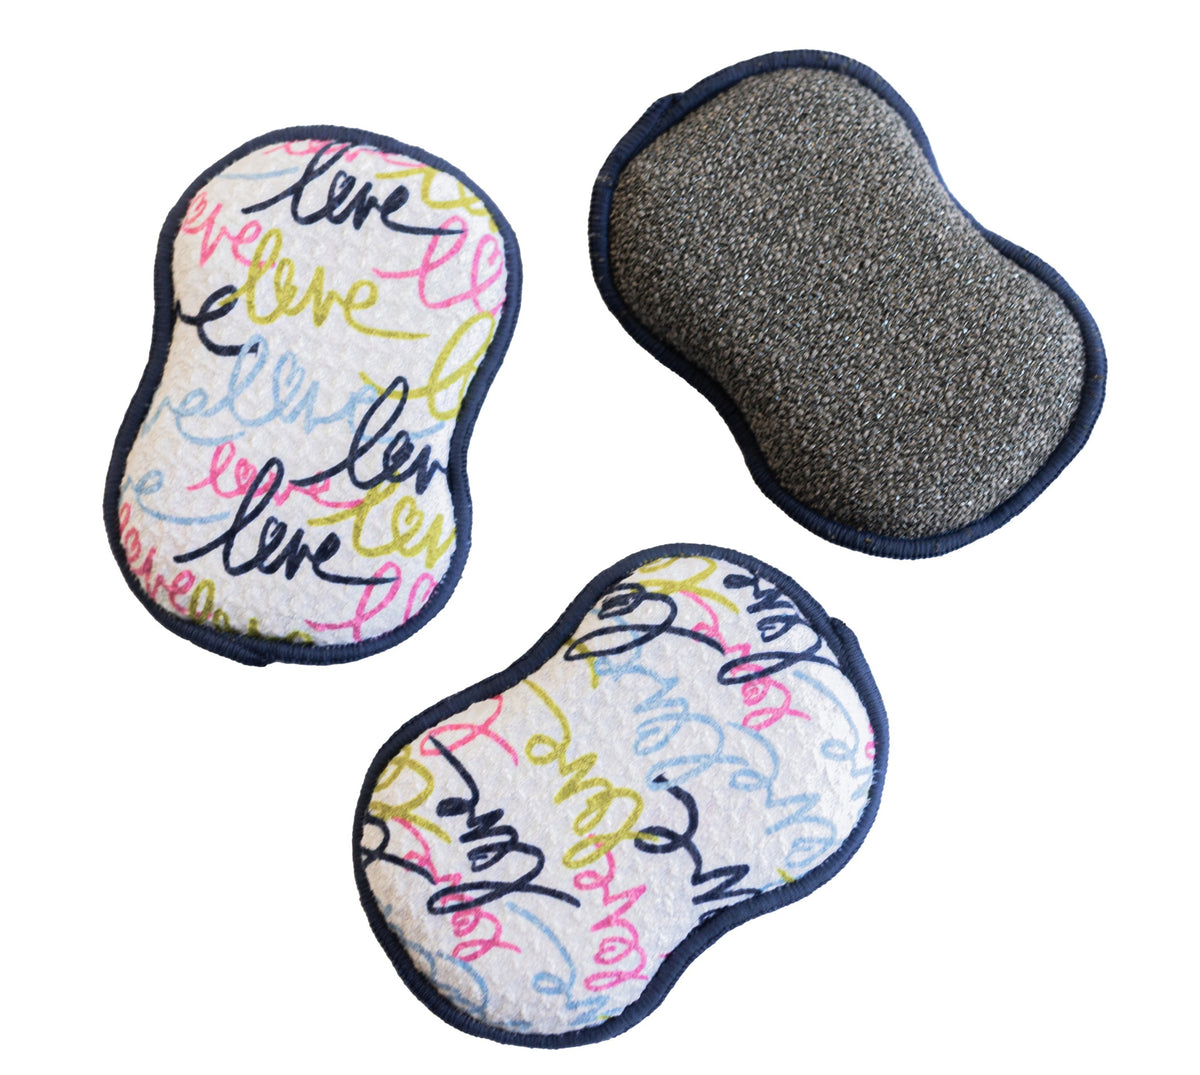 RE:usable Sponges (Set of 3) - HGC Love Sponges &amp; Scouring Pads Once Again Home Co.   